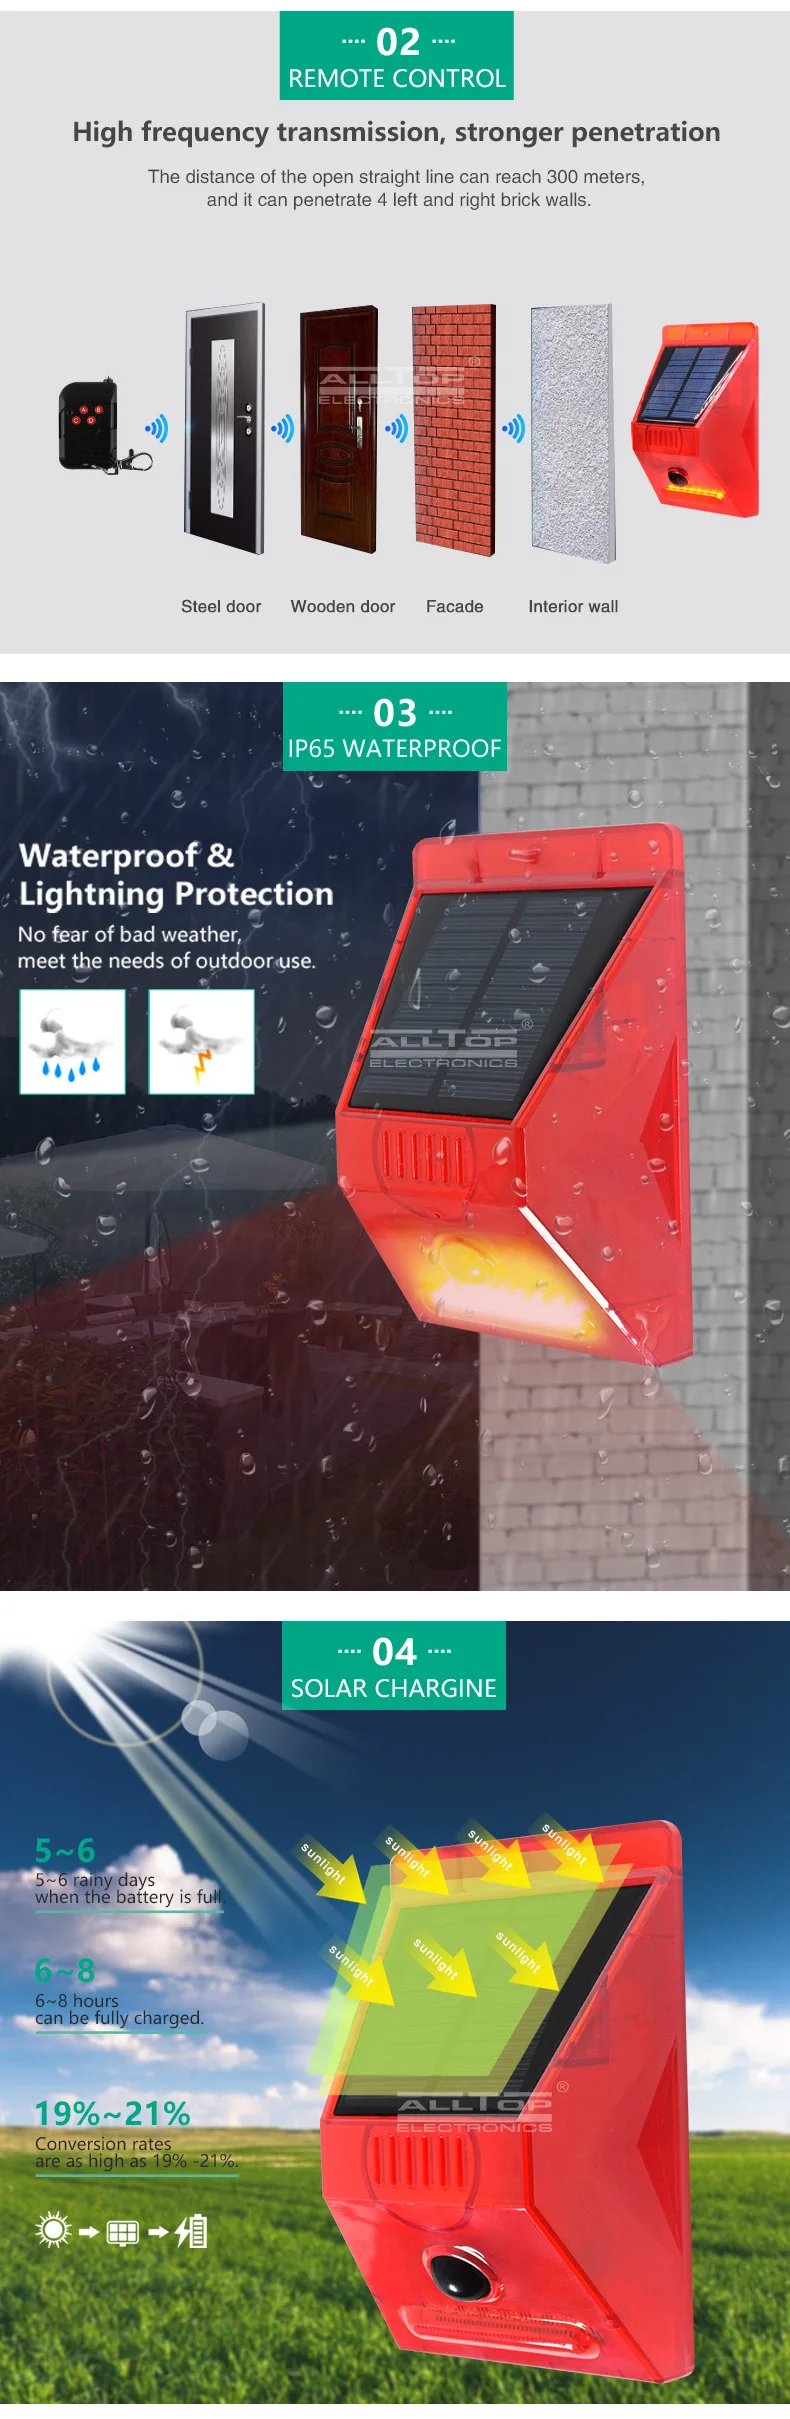 ALLTOP Supplier Hot On Sell Solar Alarm Warning Light With Remote Controlled Home Security Alarm Light